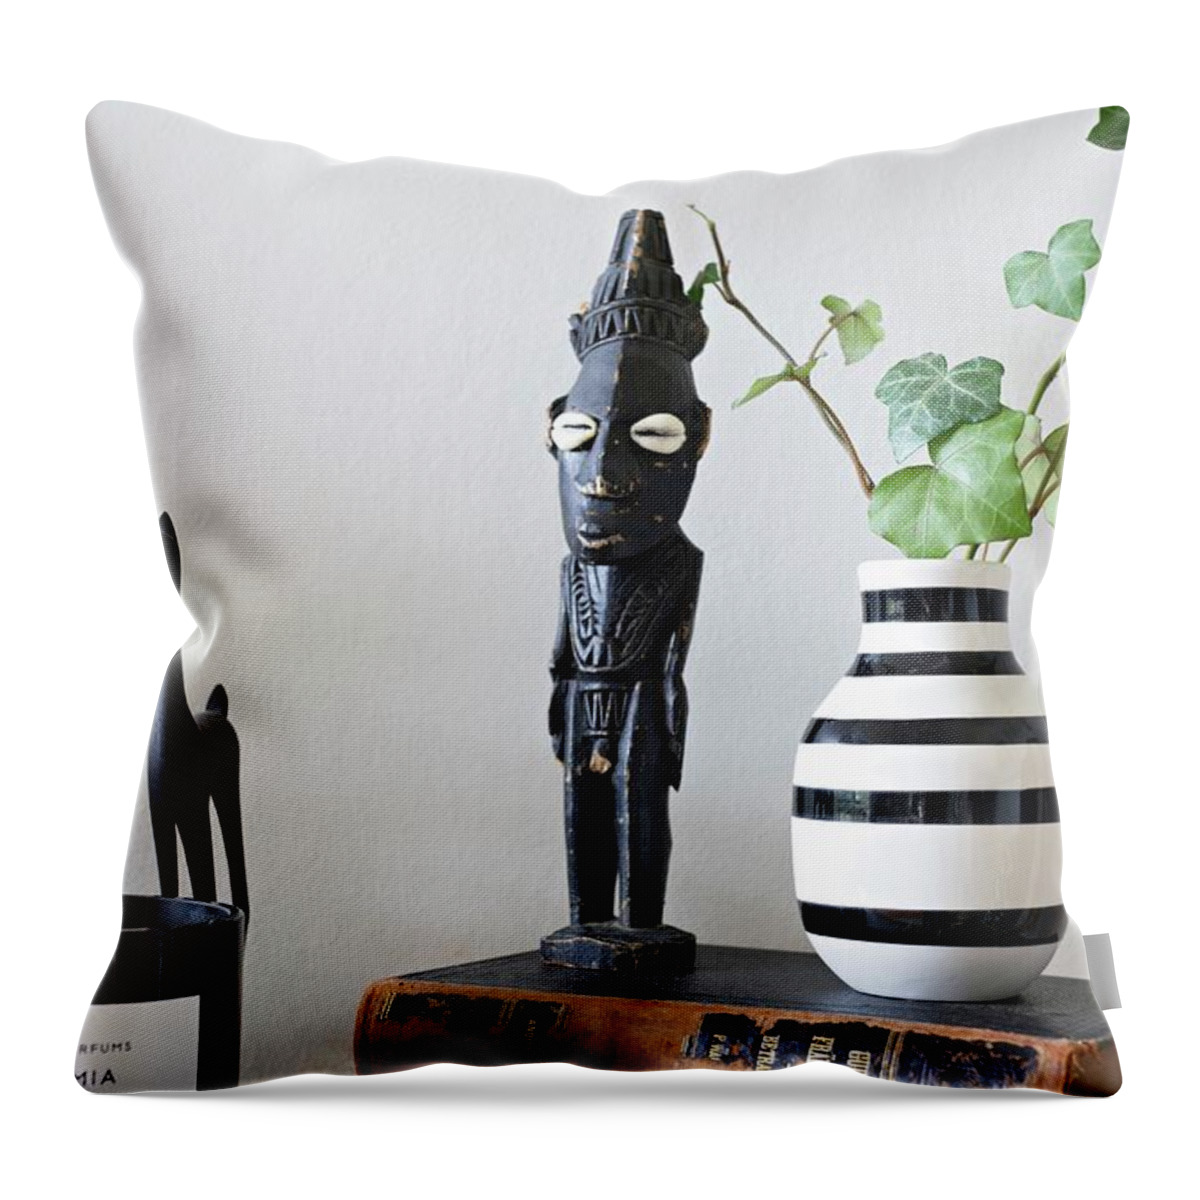 Ip_11405189 Throw Pillow featuring the photograph African Figurines And Striped Vase On Top Of Two Old Books by Cecilia Mller